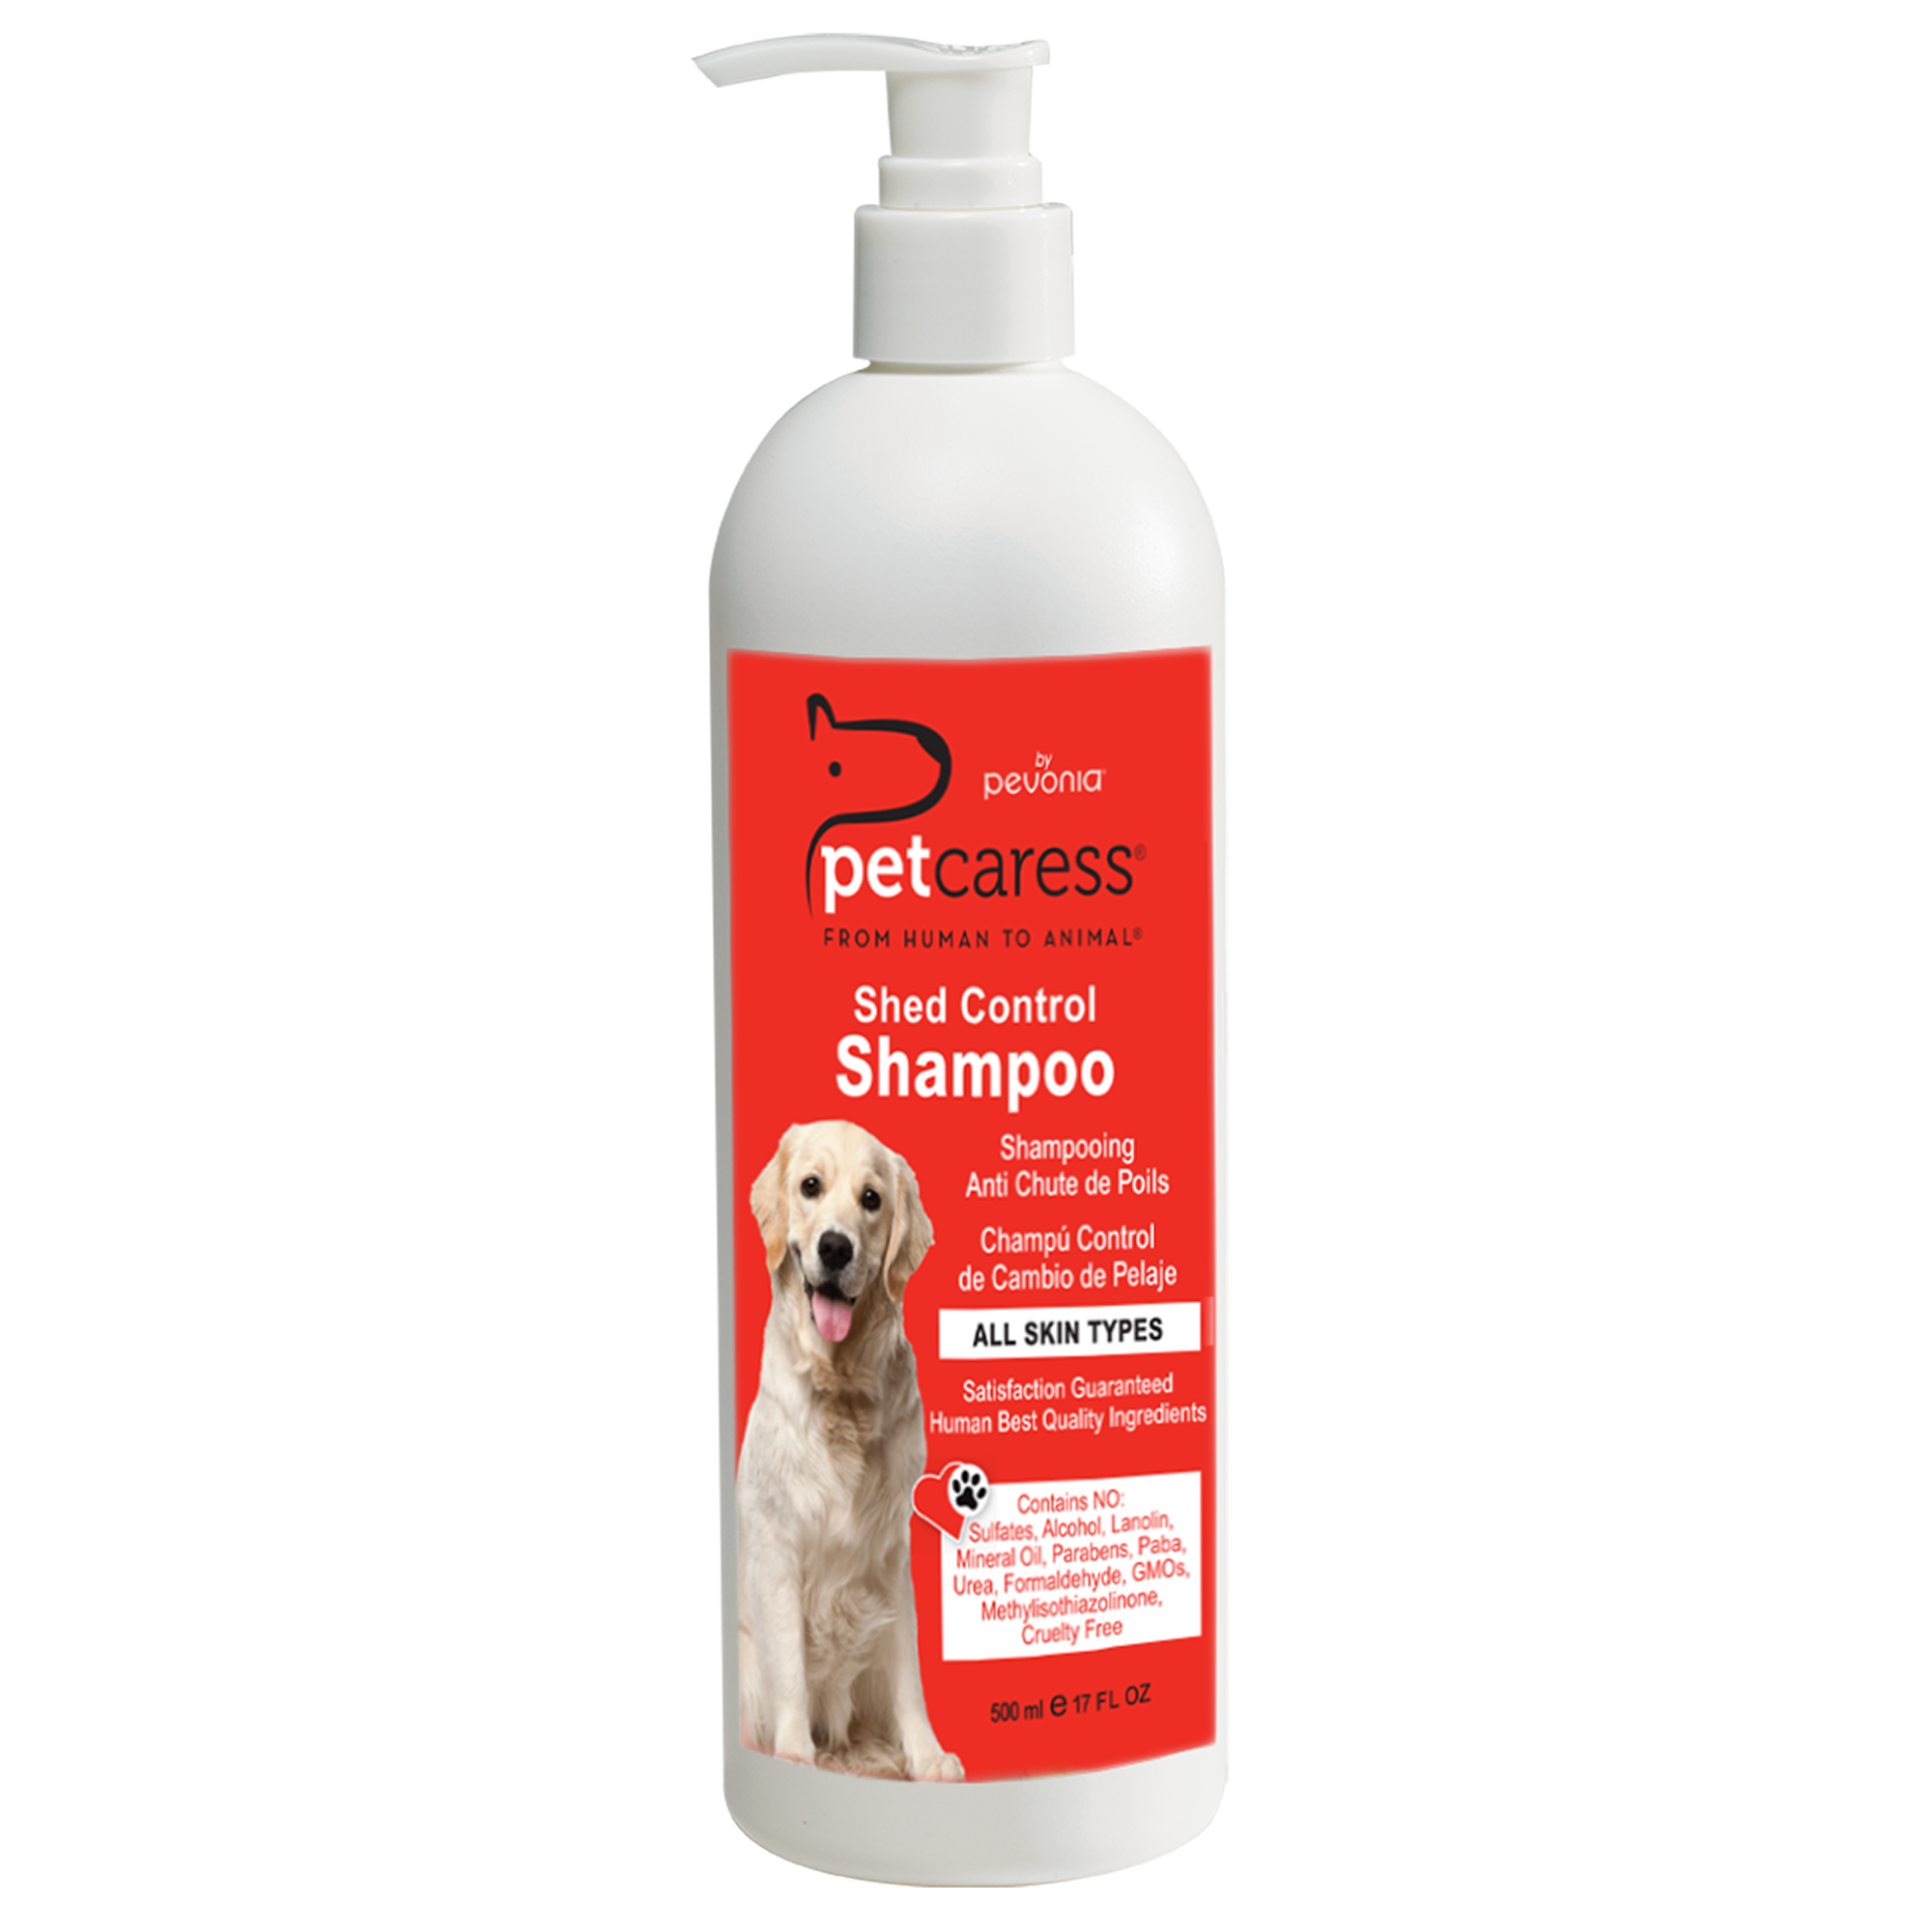 Shed Control Shampoo - All Skin Types